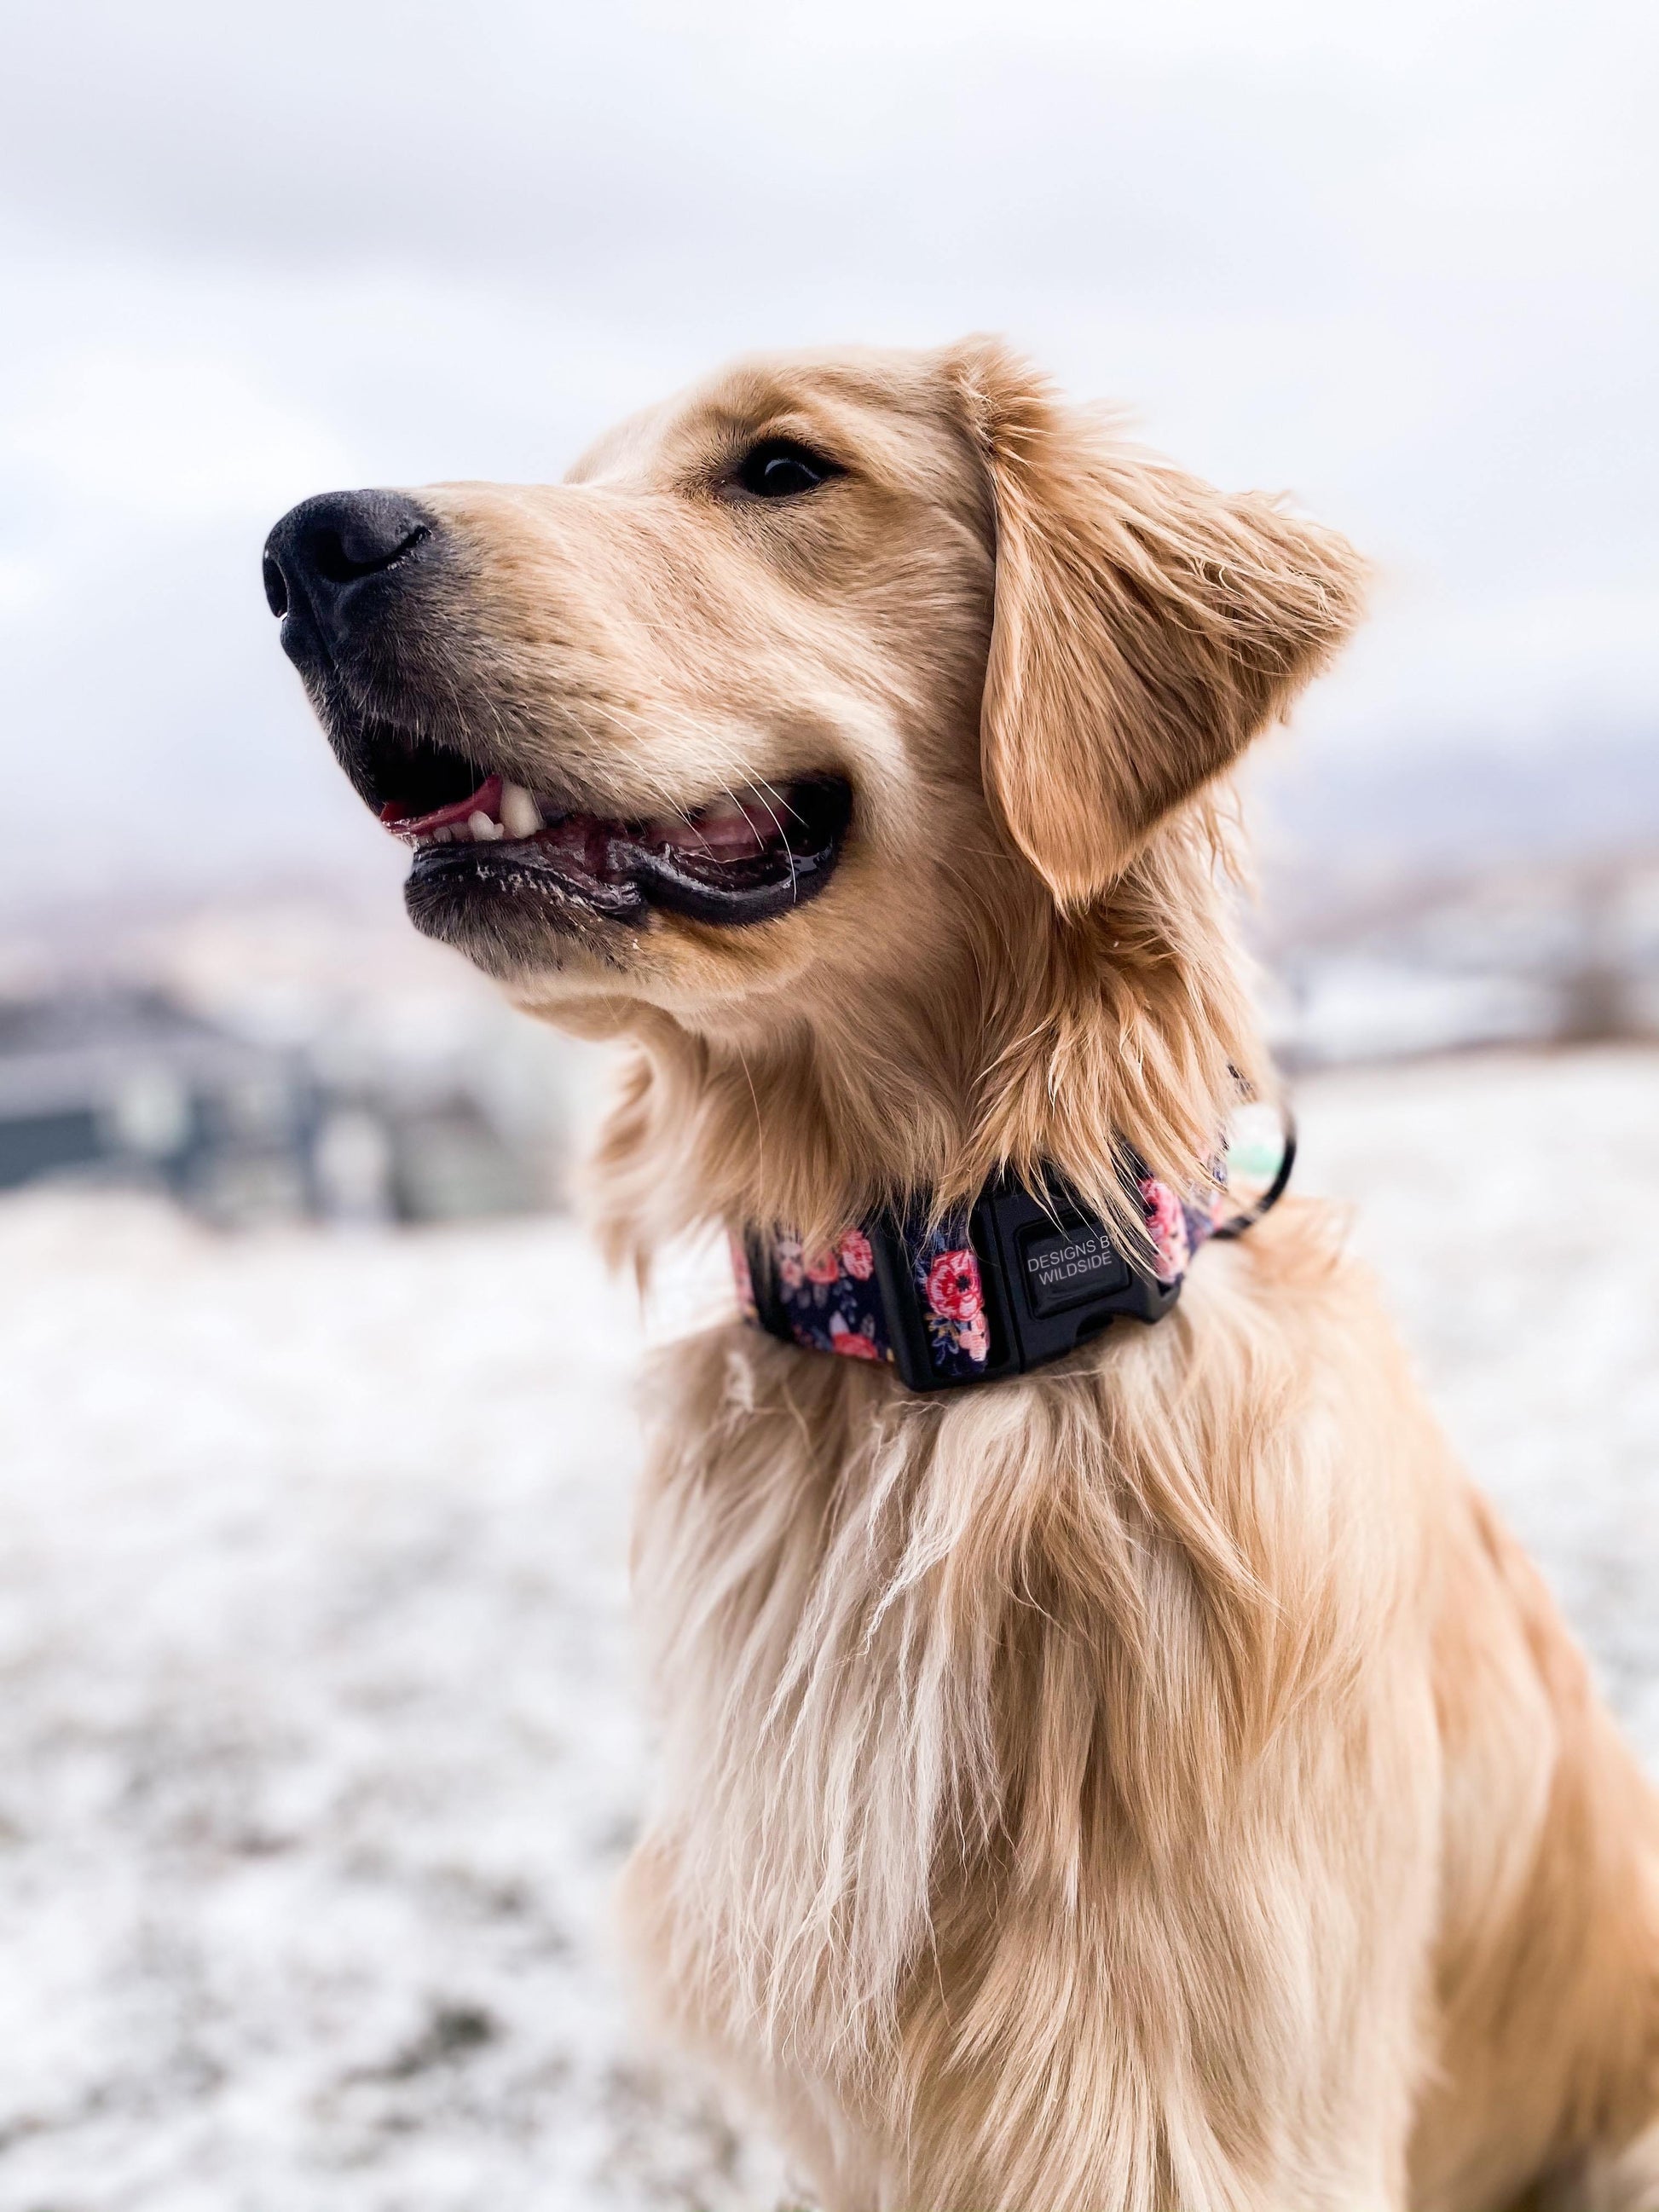 Wild Meadows Padded Comfort Dog Collar – Designs By Wildside